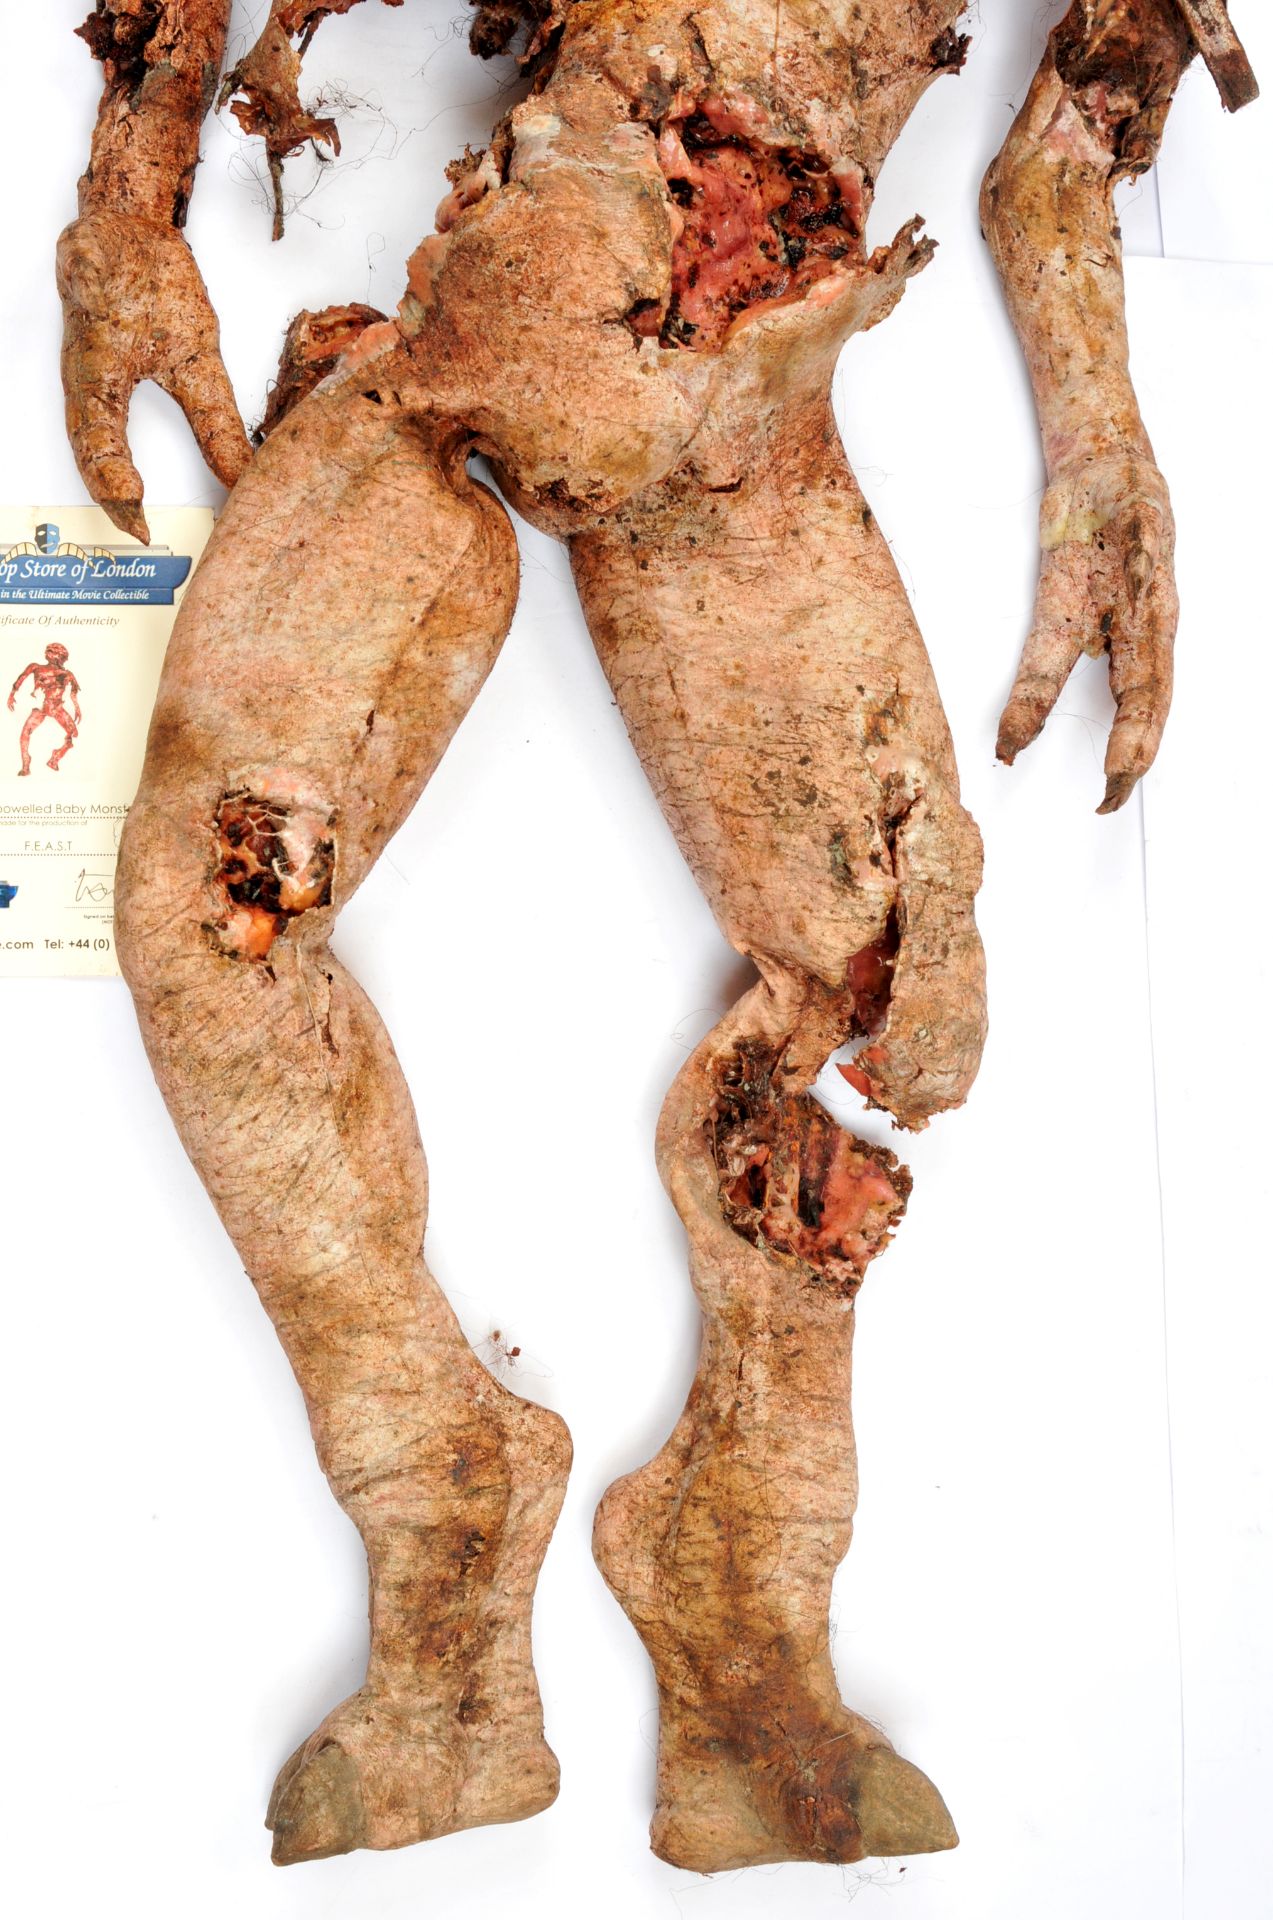 Disembowelled Baby Monster Prop used in the production of the Horror Movie F.E.A.S.T - Image 4 of 5